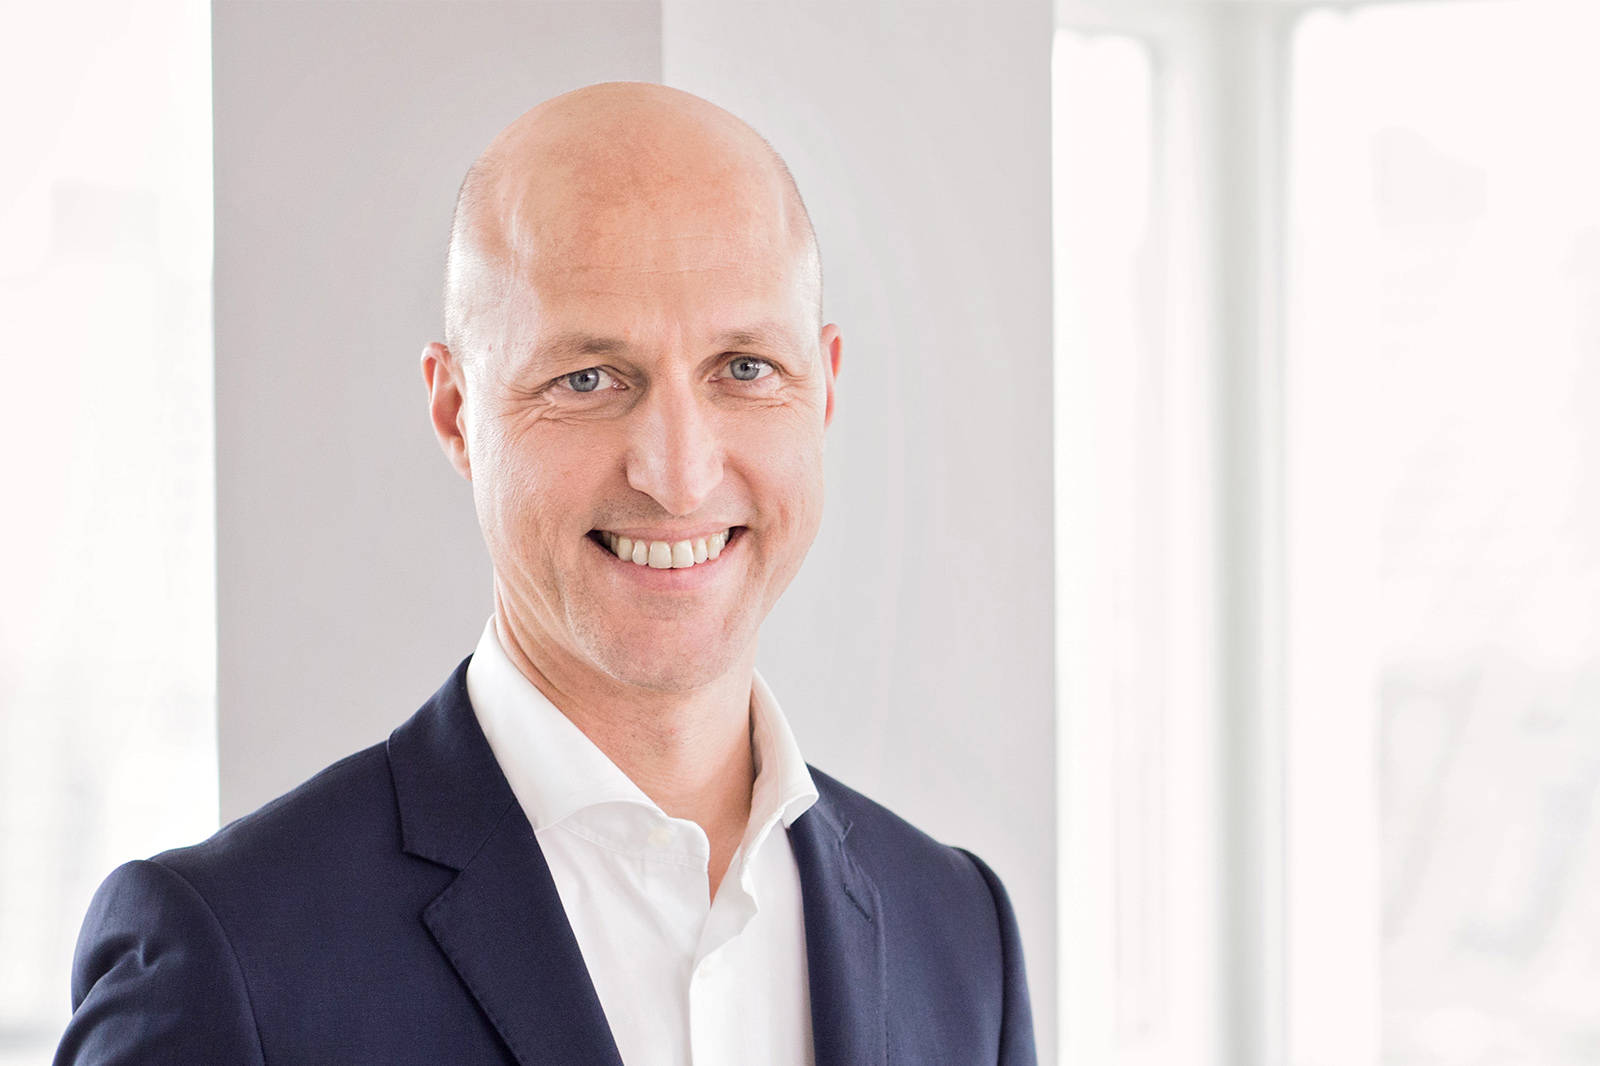 Sven Utermöhlen | Chief Executive Officer (CEO) of RWE Offshore Wind